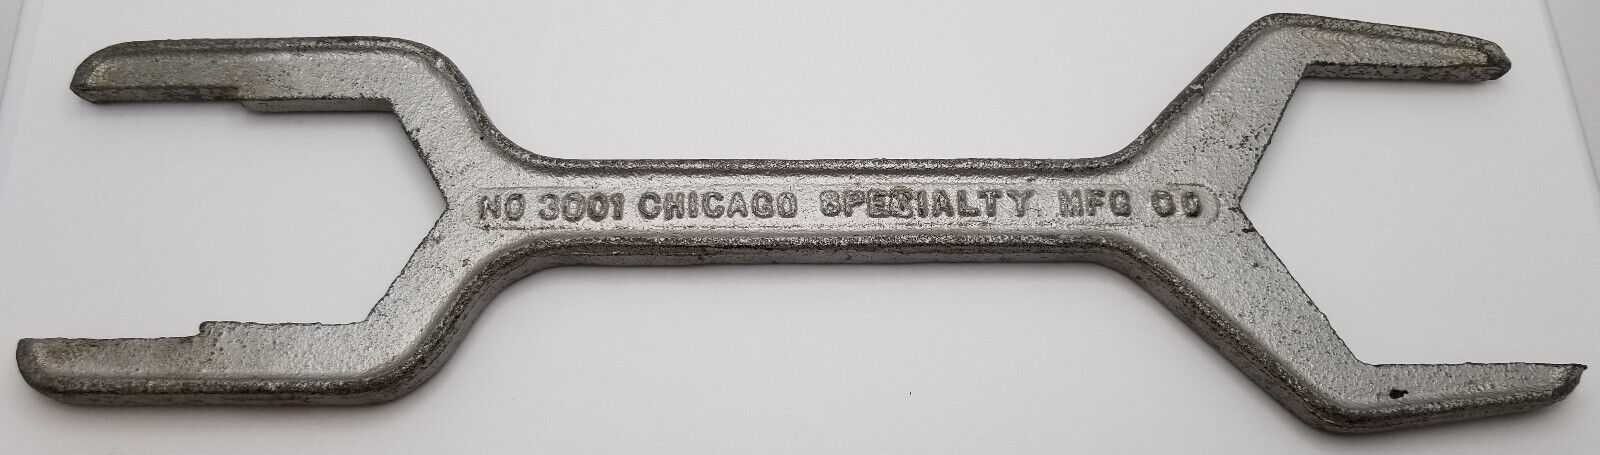 Vintage Chicago Specialty Mfg Co 3 in 1 Spud Wrench No. 3001  Iron Hand Tool